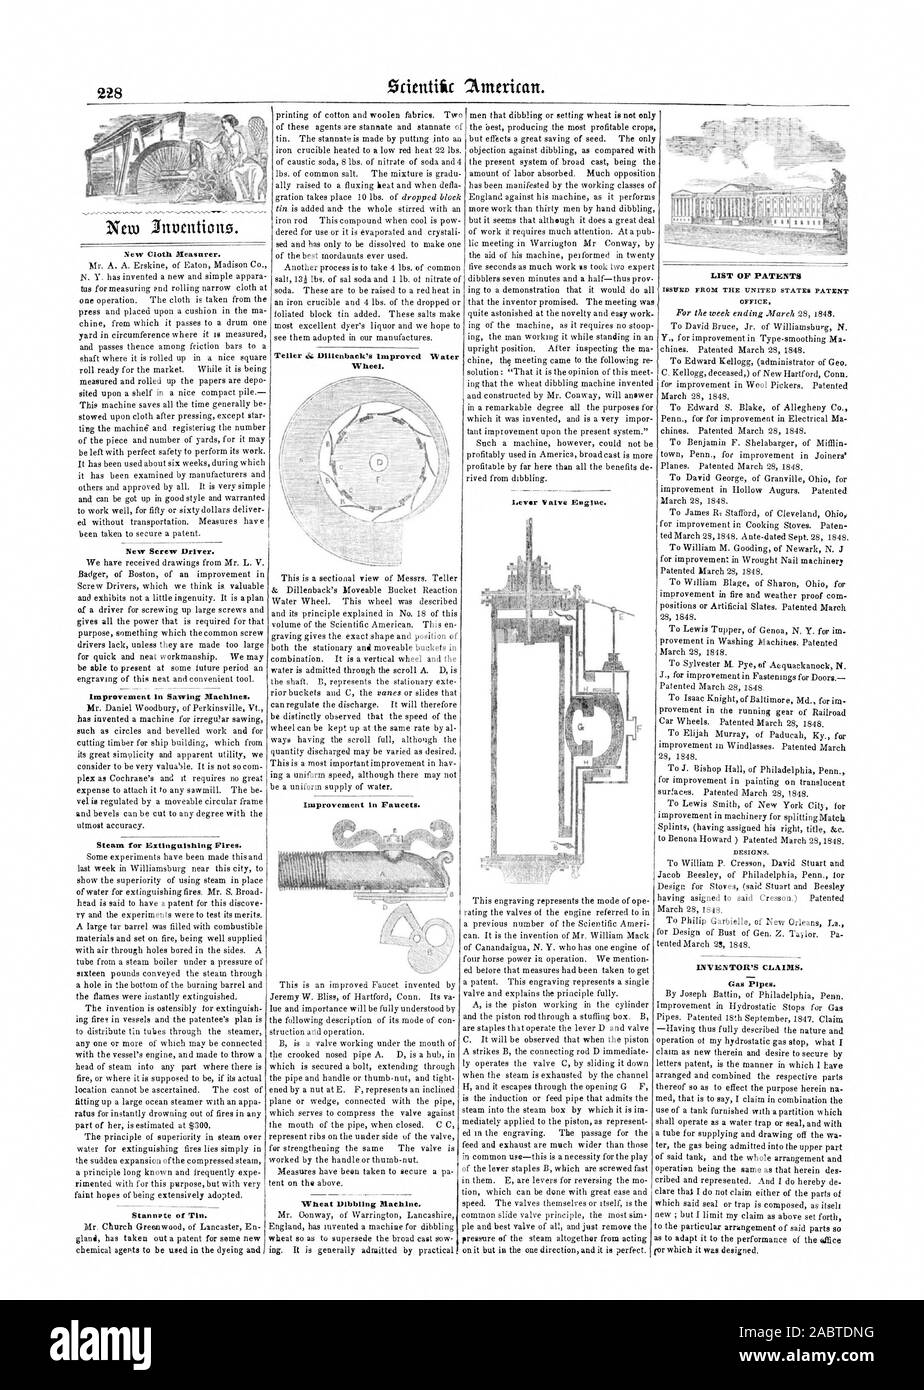 New Cloth Measurer. Mr. A. A. Erskine of Eaton Madison Co. N. Y. has invented a new and simple appara tus for measuring end rolling narrow cloth at one operation. The cloth is taken from the press and placed upon a cushion in the ma chine from which it passes to a drum one shaft where it is rolled up in a nice square roll ready for the market. While it is being measured and rolled up the papers are depo sited upon a shelf in a nice compact pile This machine saves all the time generally be stowed upon cloth after pressing except star ting the machine and registering the number of the piece and Stock Photo